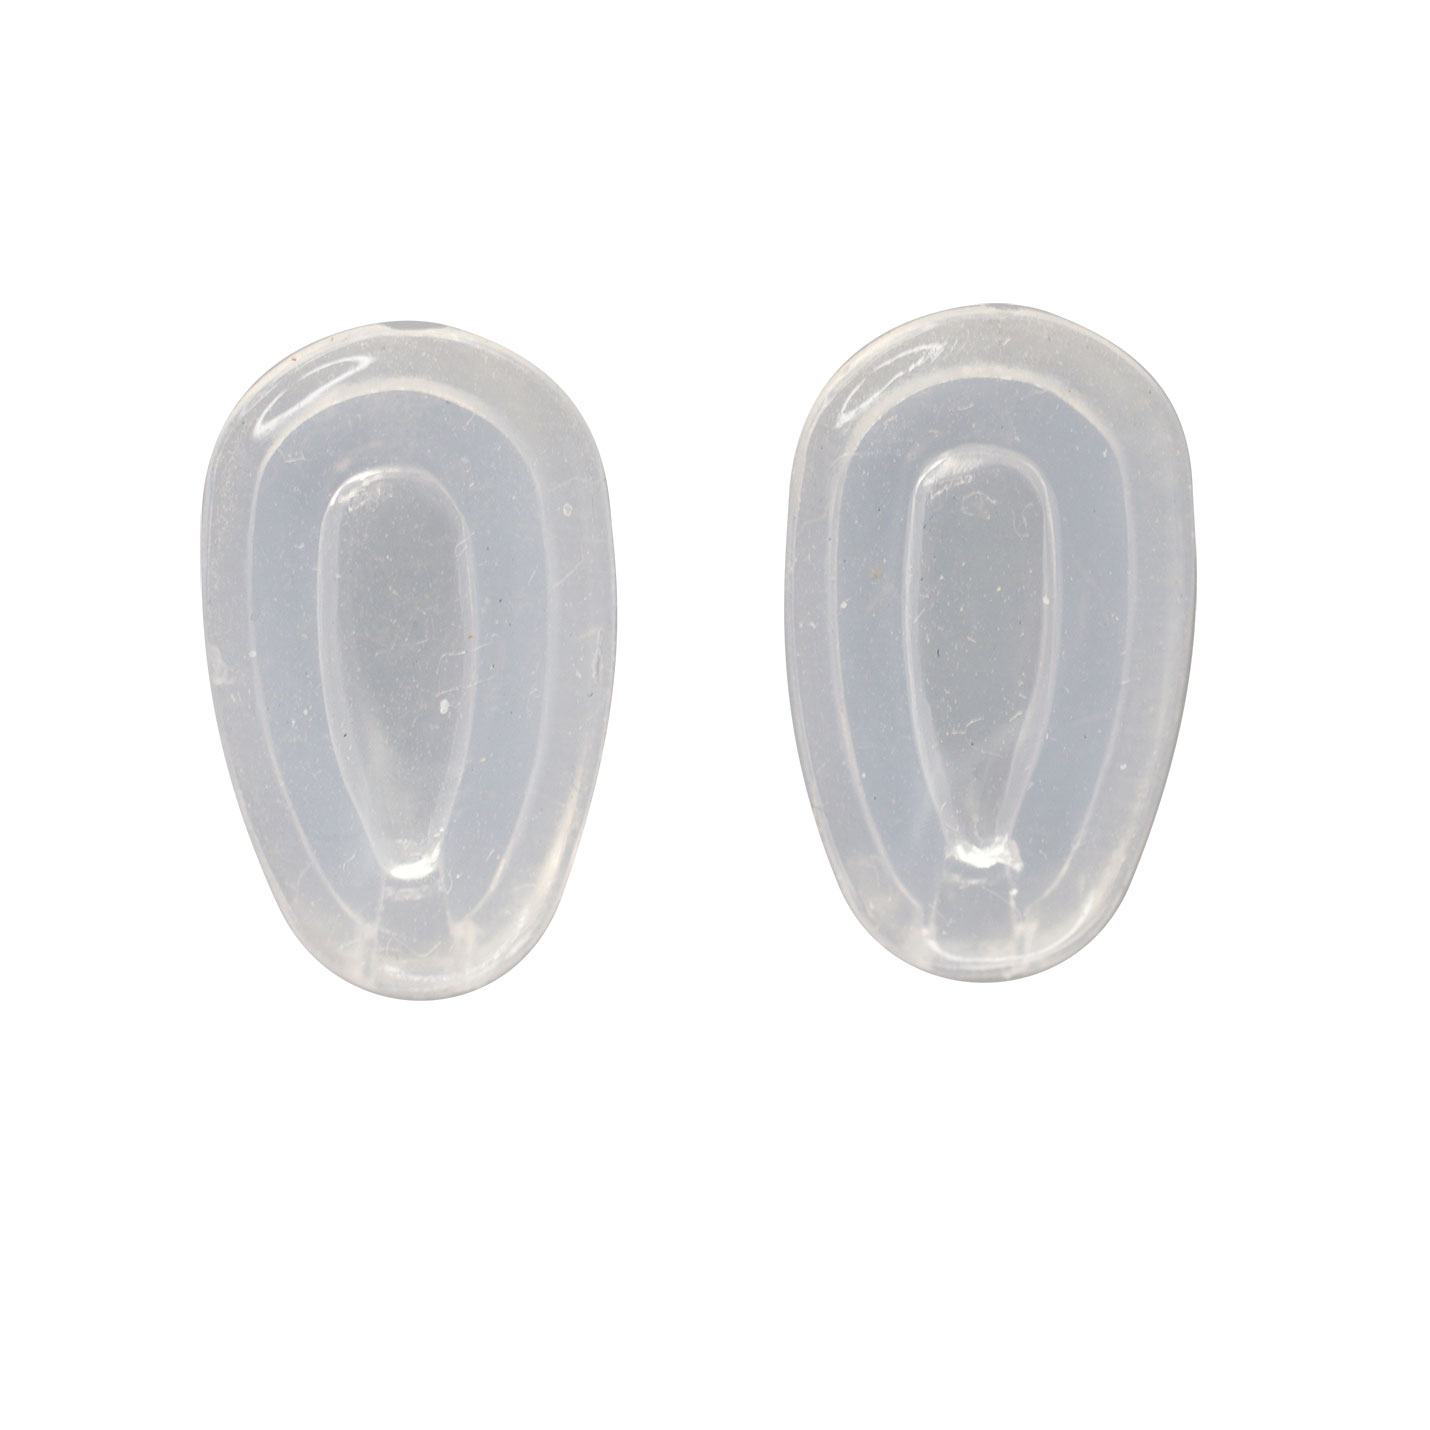 nose pads for oakley sunglasses